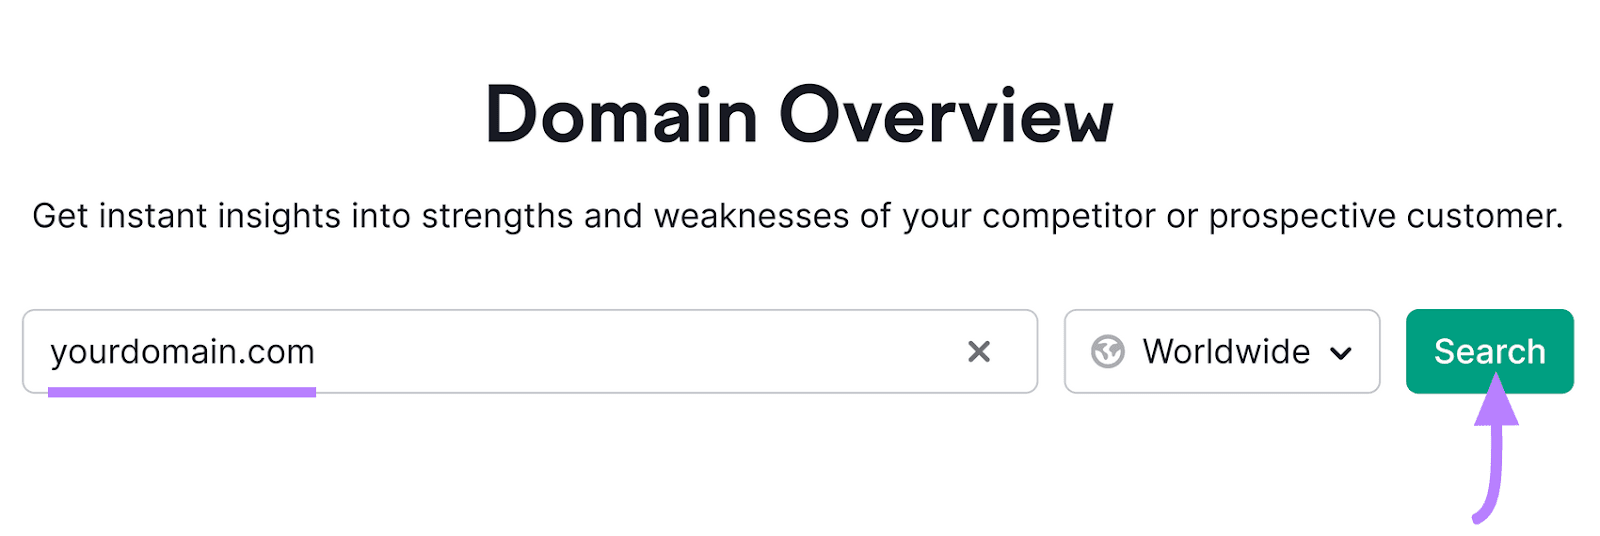 Domain Overview tool